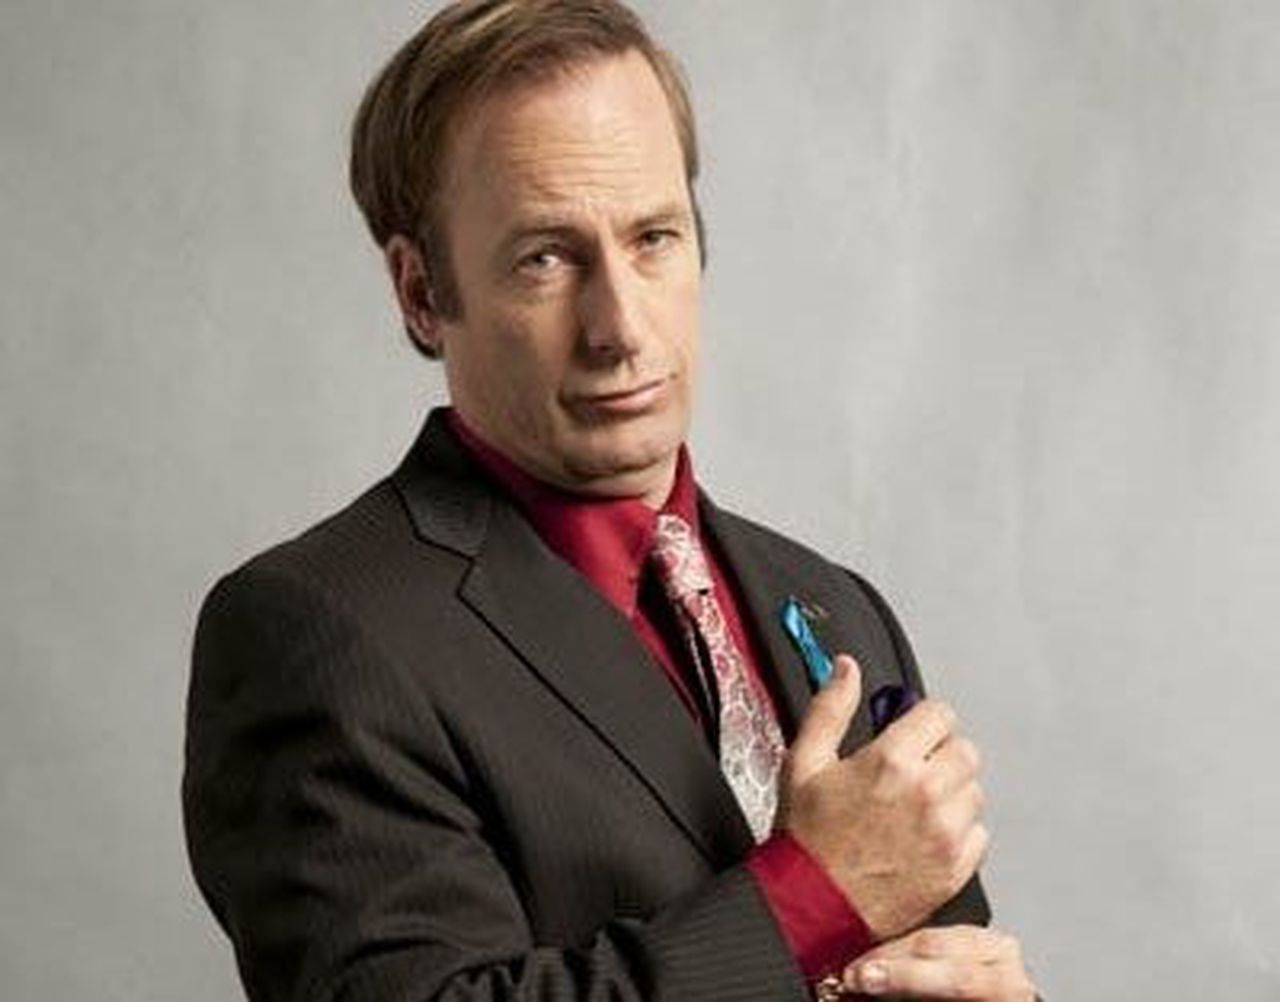 Sleazy TV lawyer Saul Goodman of 'Breaking Bad' fame gets his own show ...